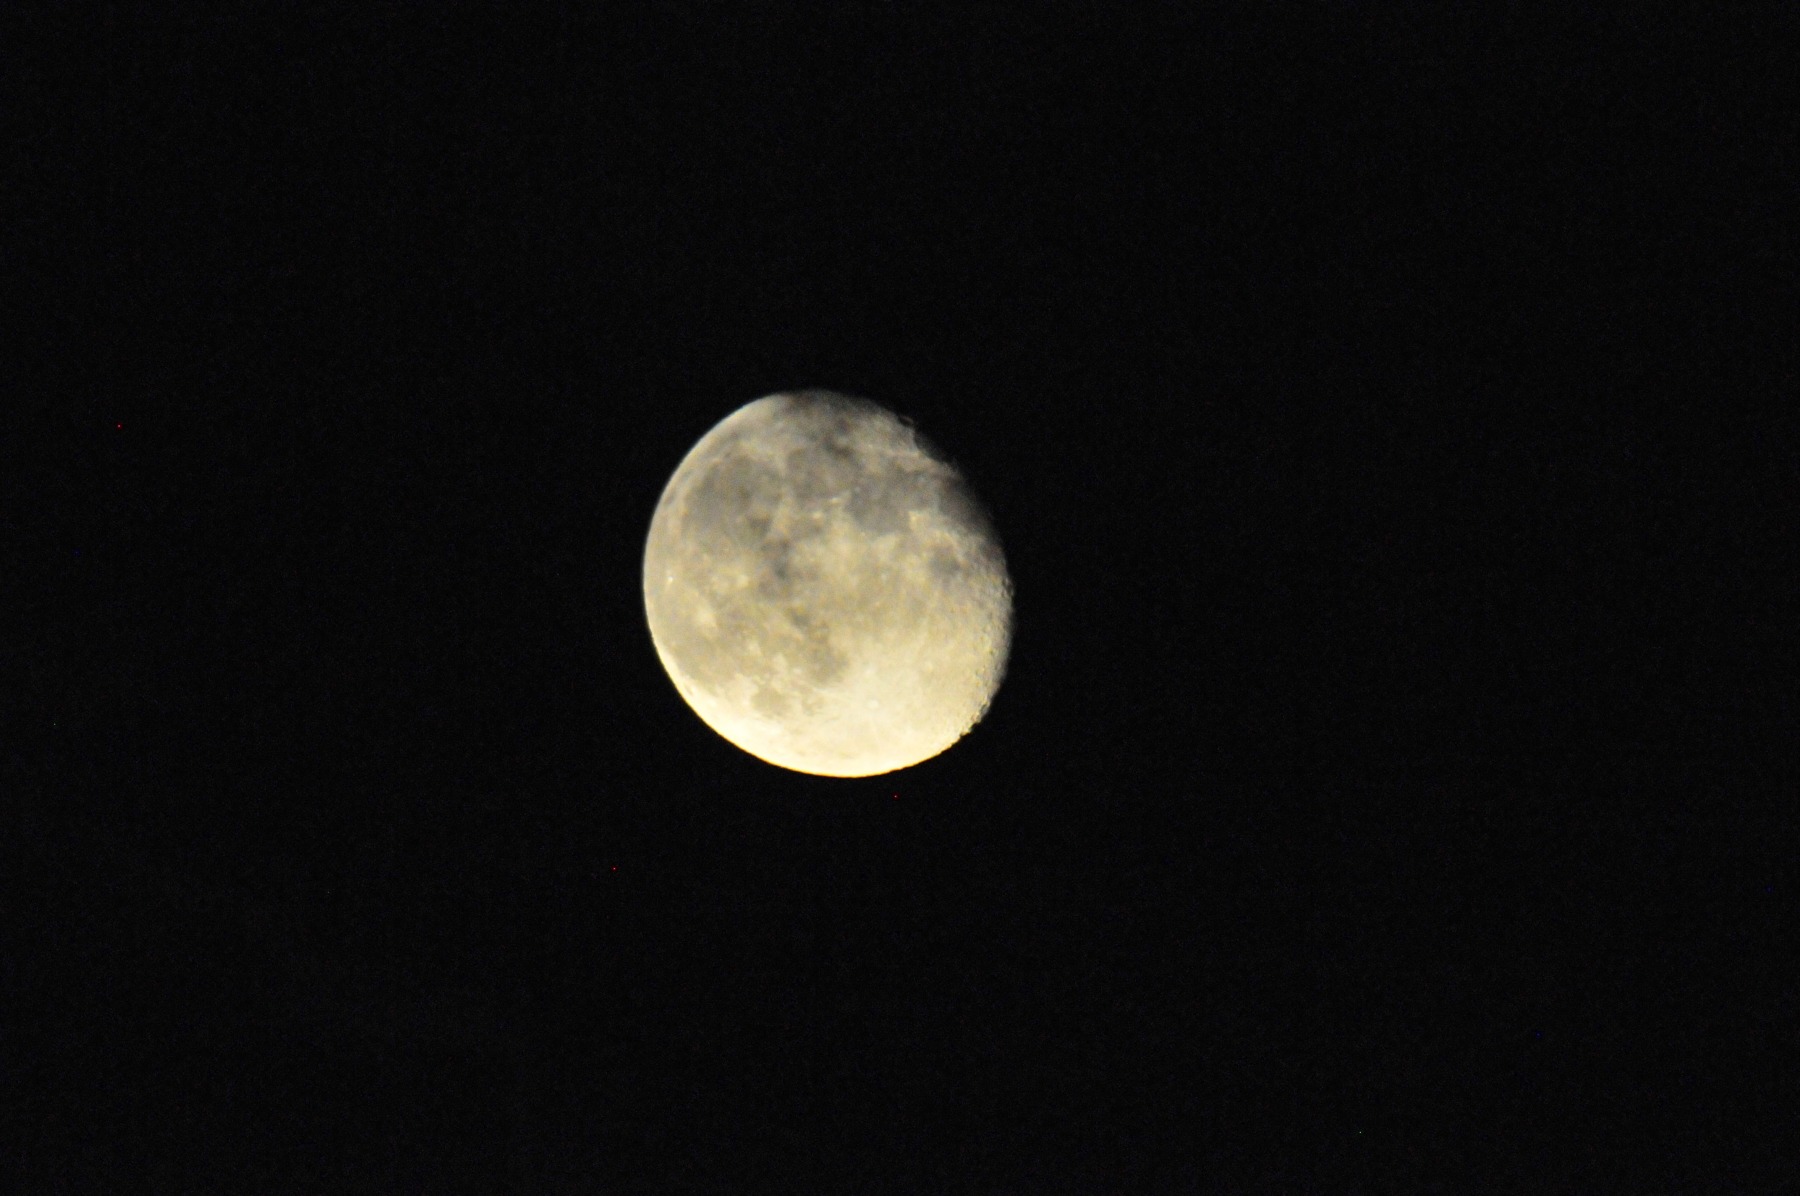 The moon at 900mm effective focal length!